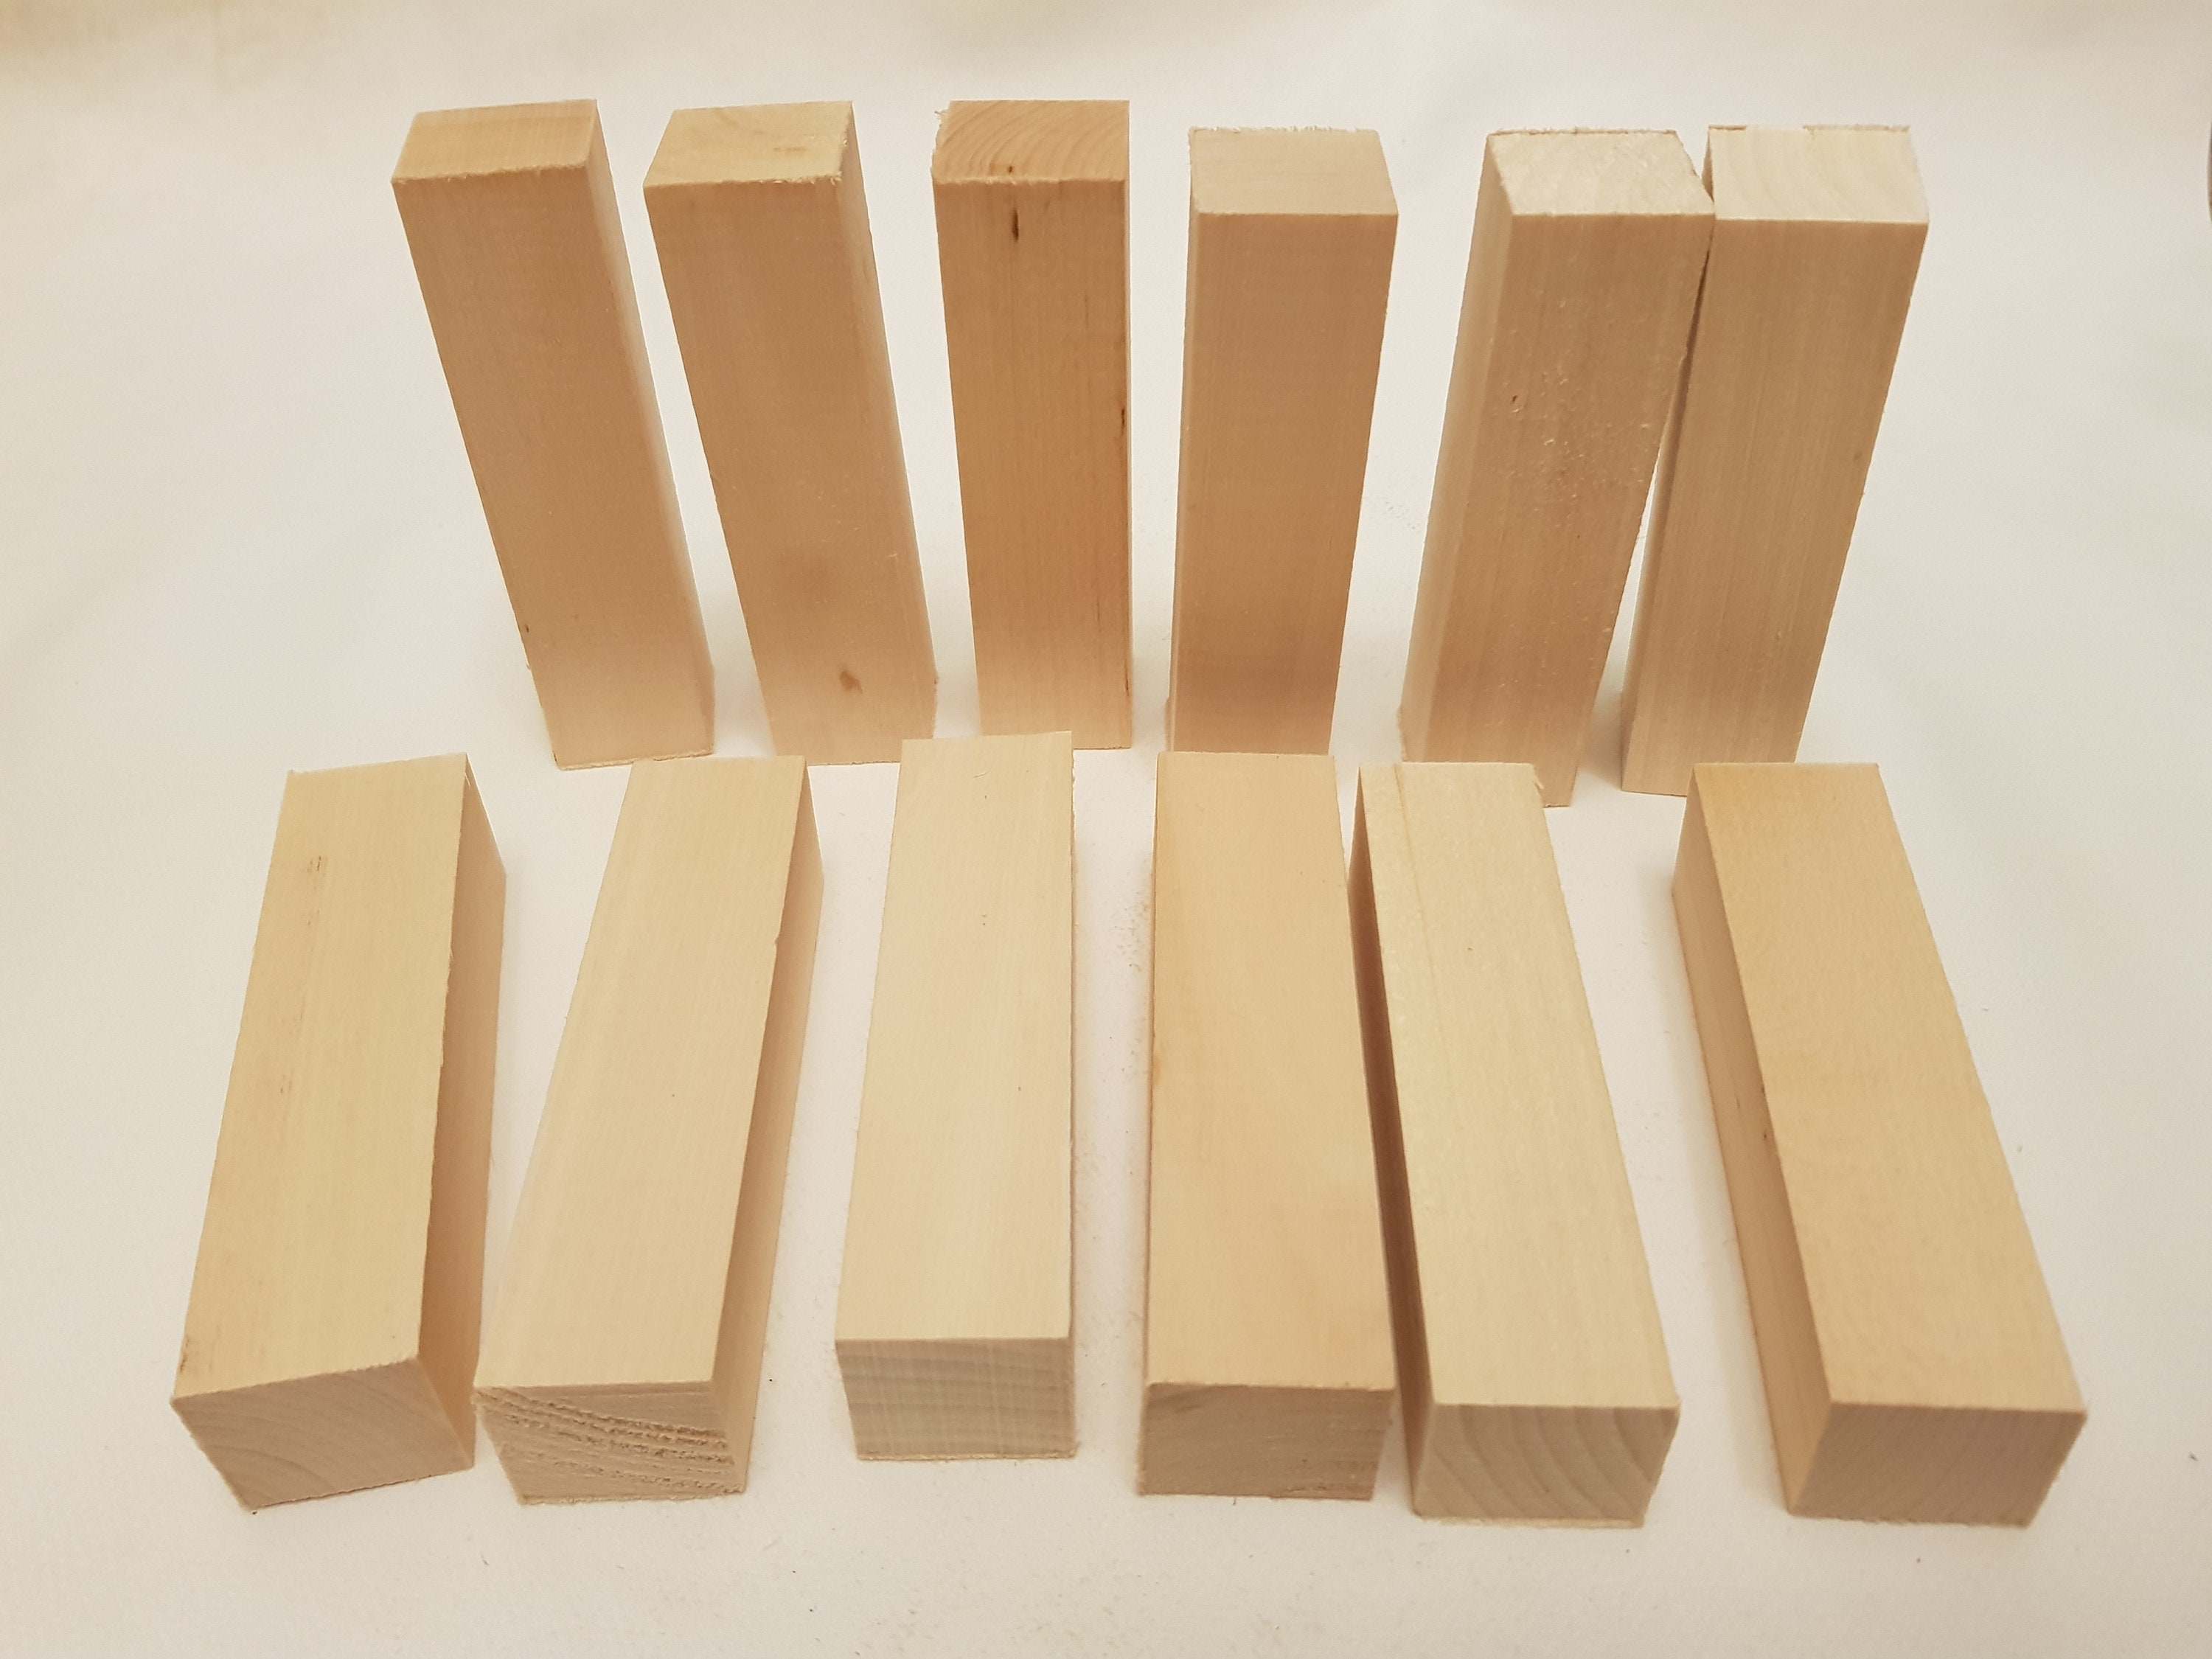 Lime Wood 12 Piece Soft Lime Wood Hand Carving Blanks Blocks 100x25x25 